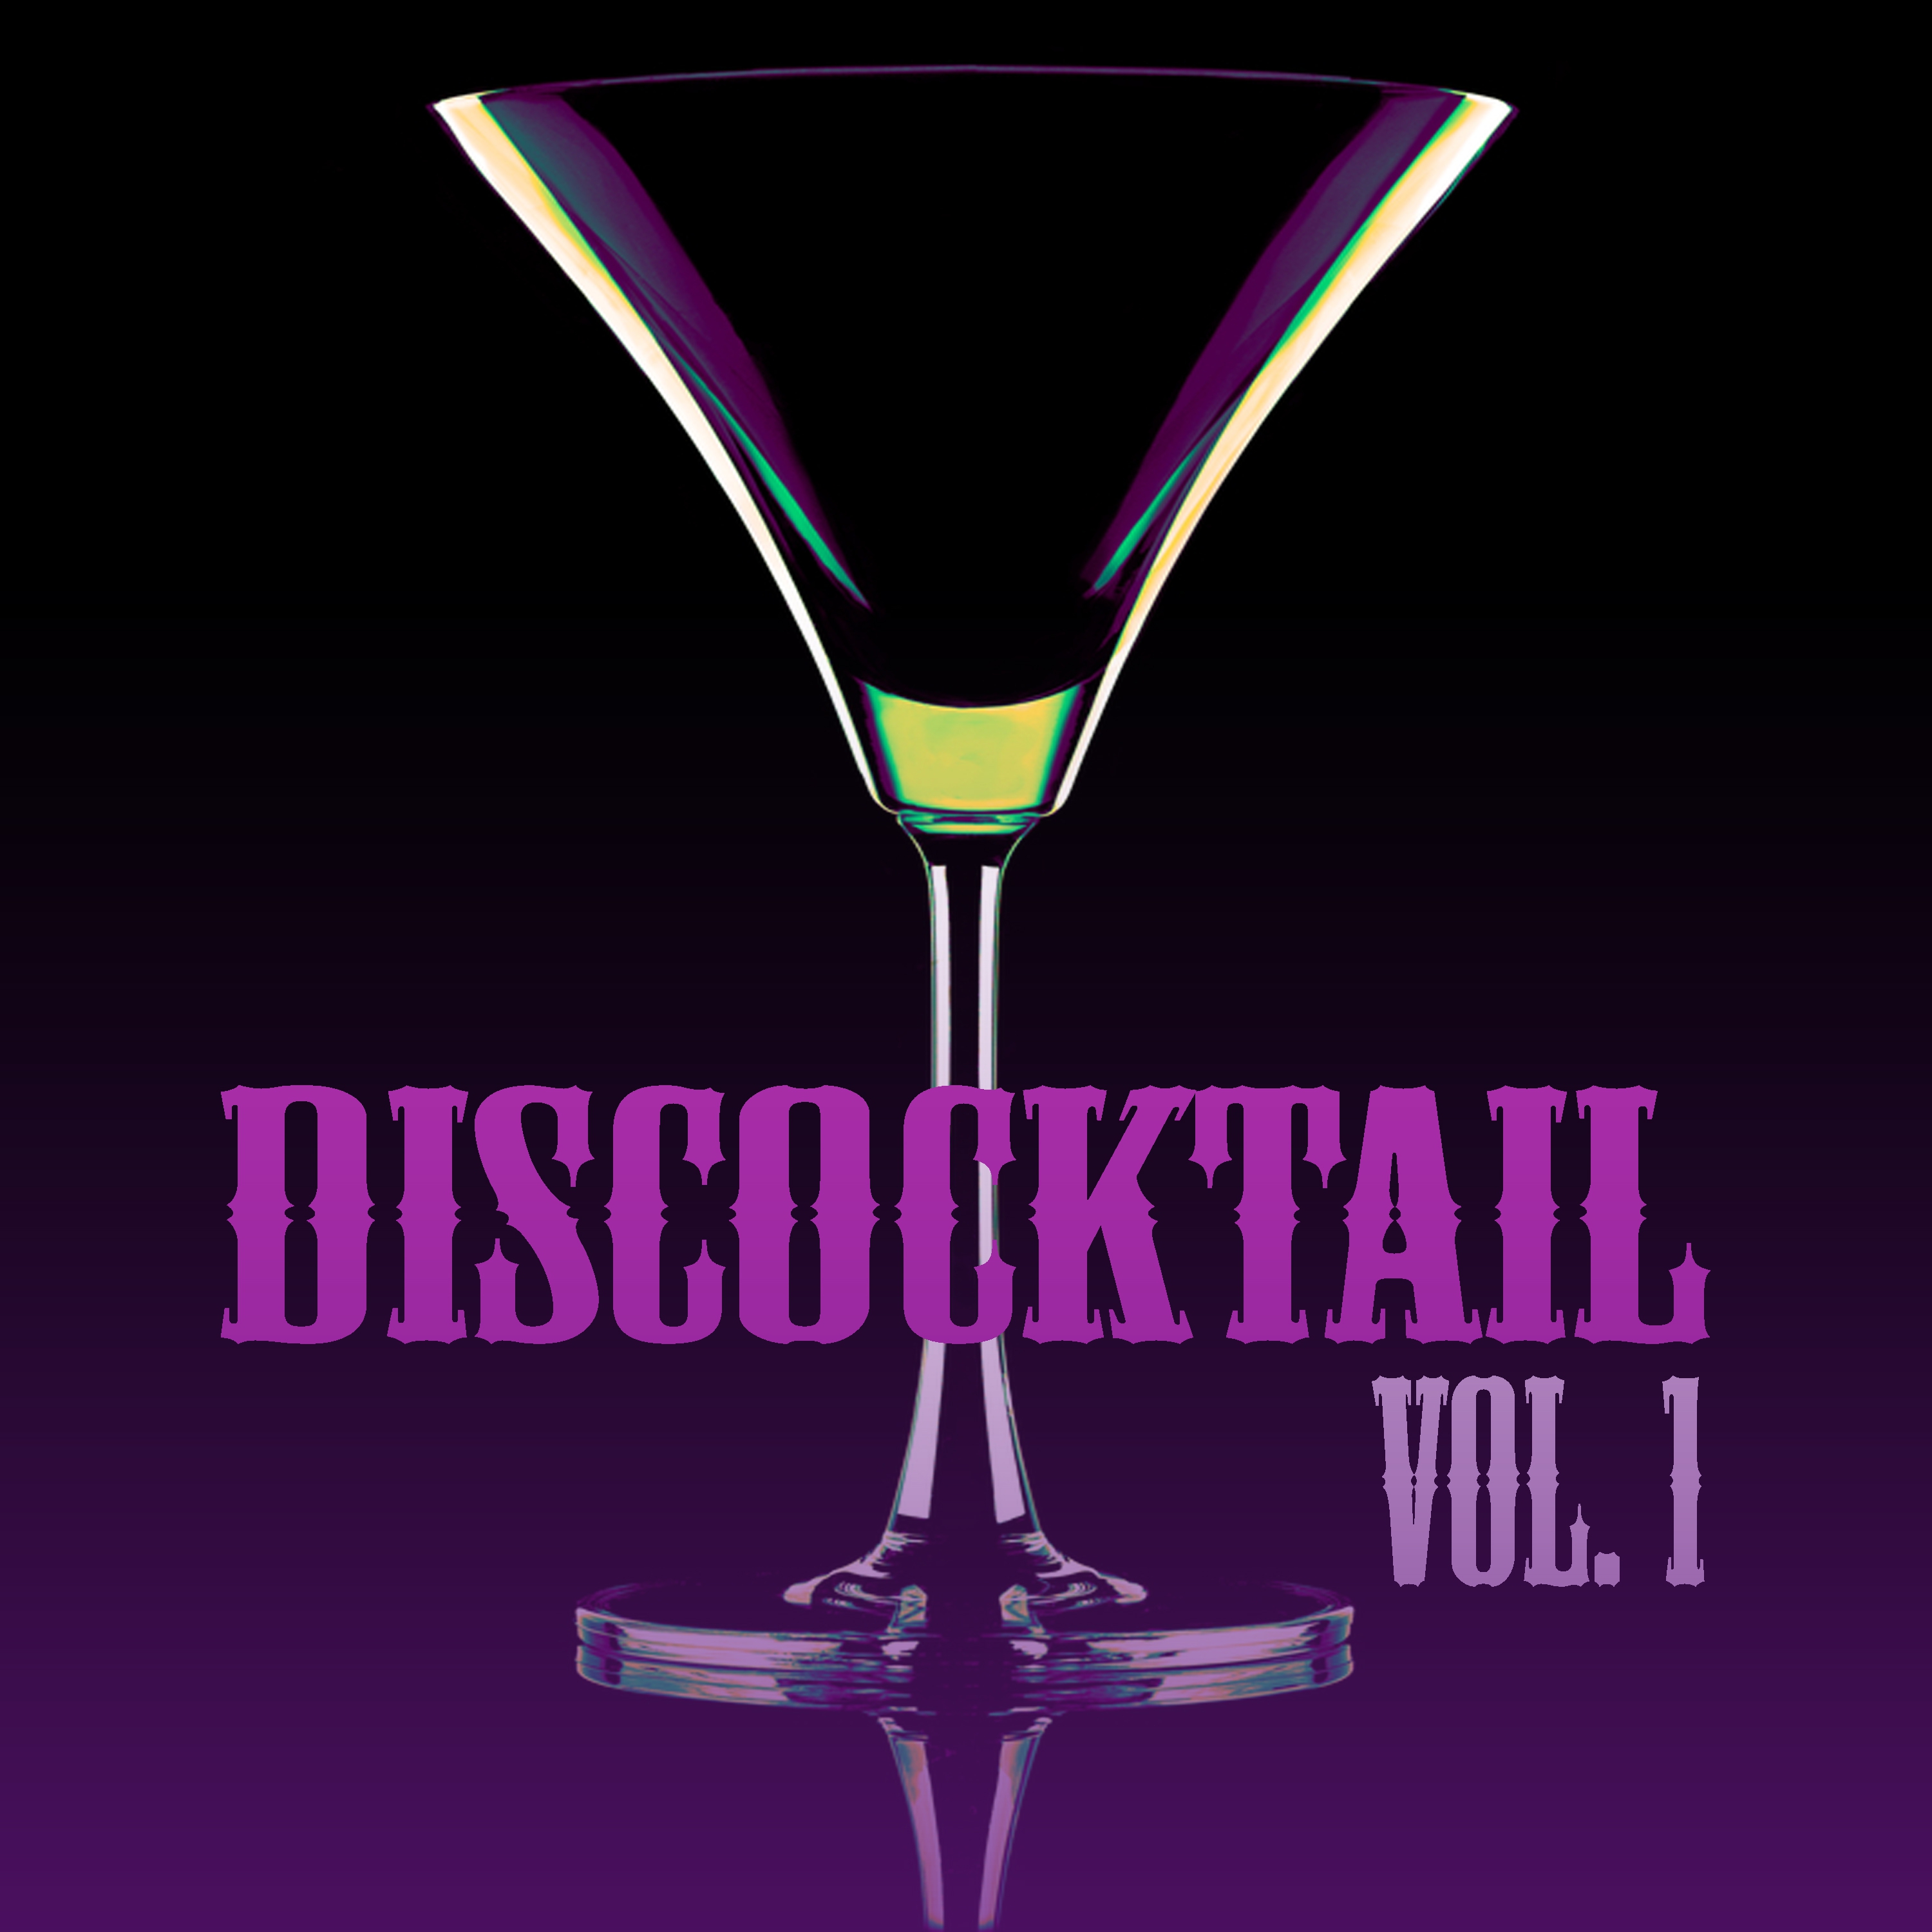 Discocktail, Vol. 1